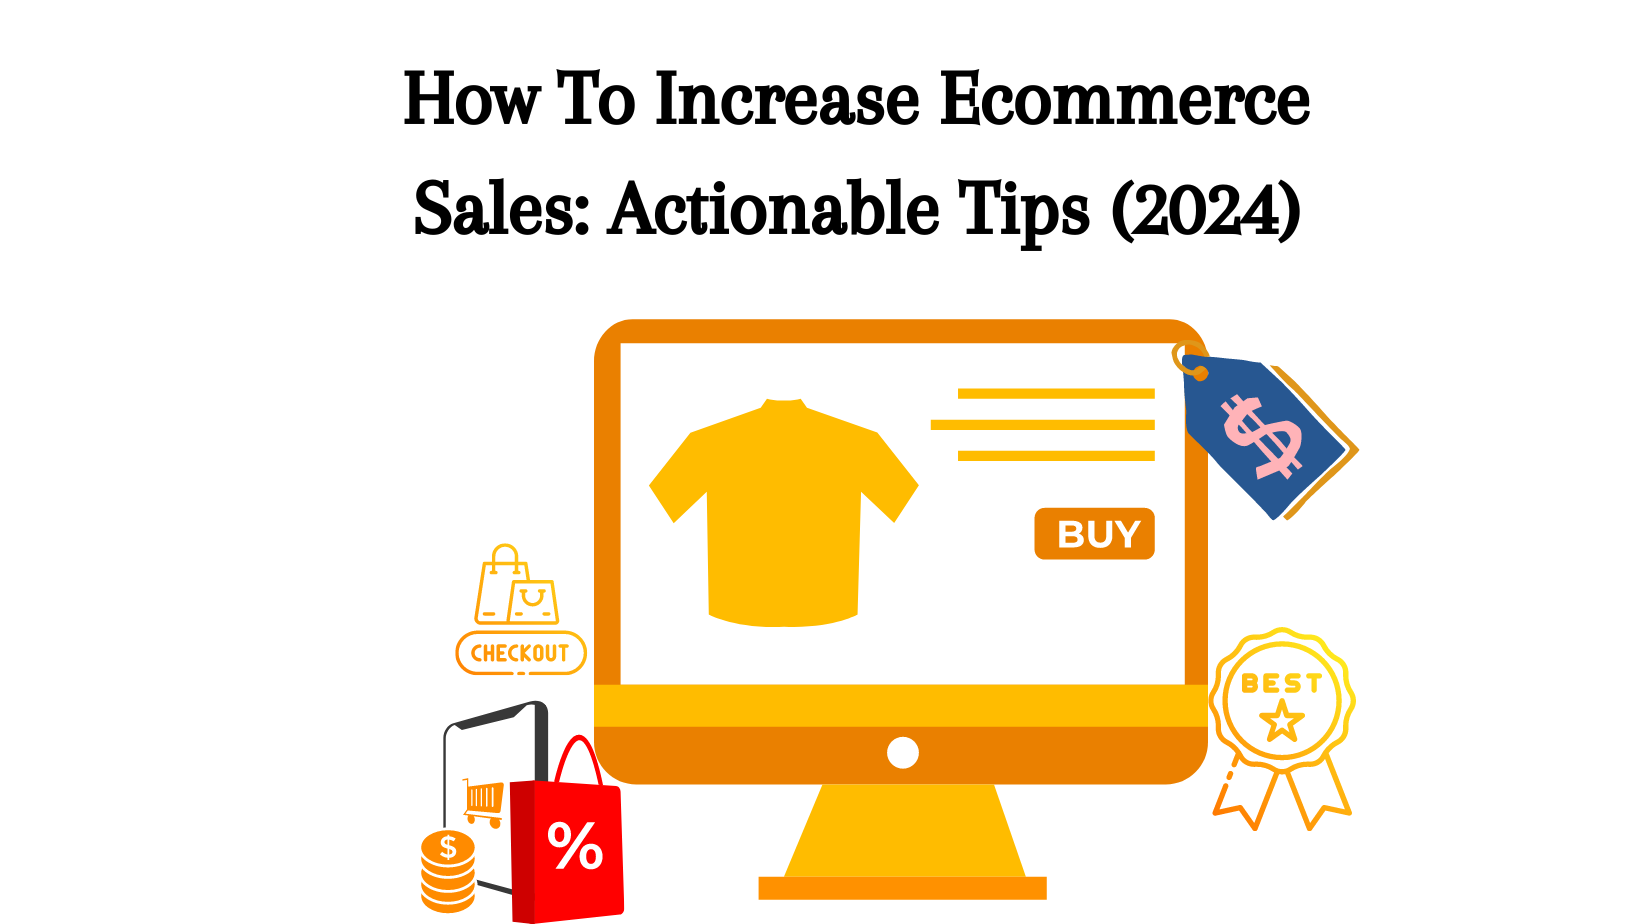 How To Increase Ecommerce Sales Actionable Tips (2024)